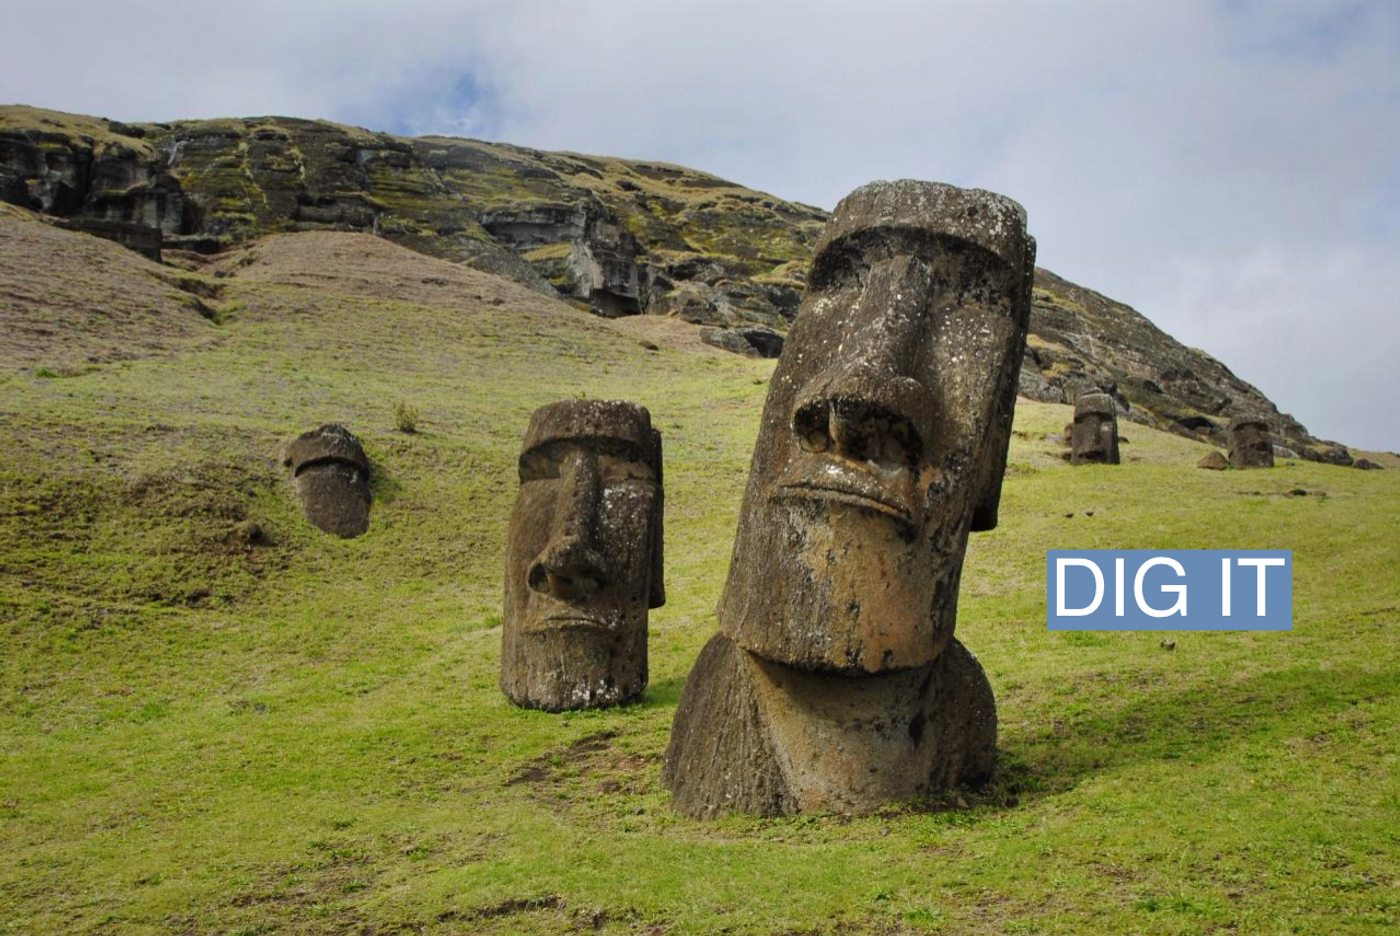 Several moai heads can be seen on Easter Island